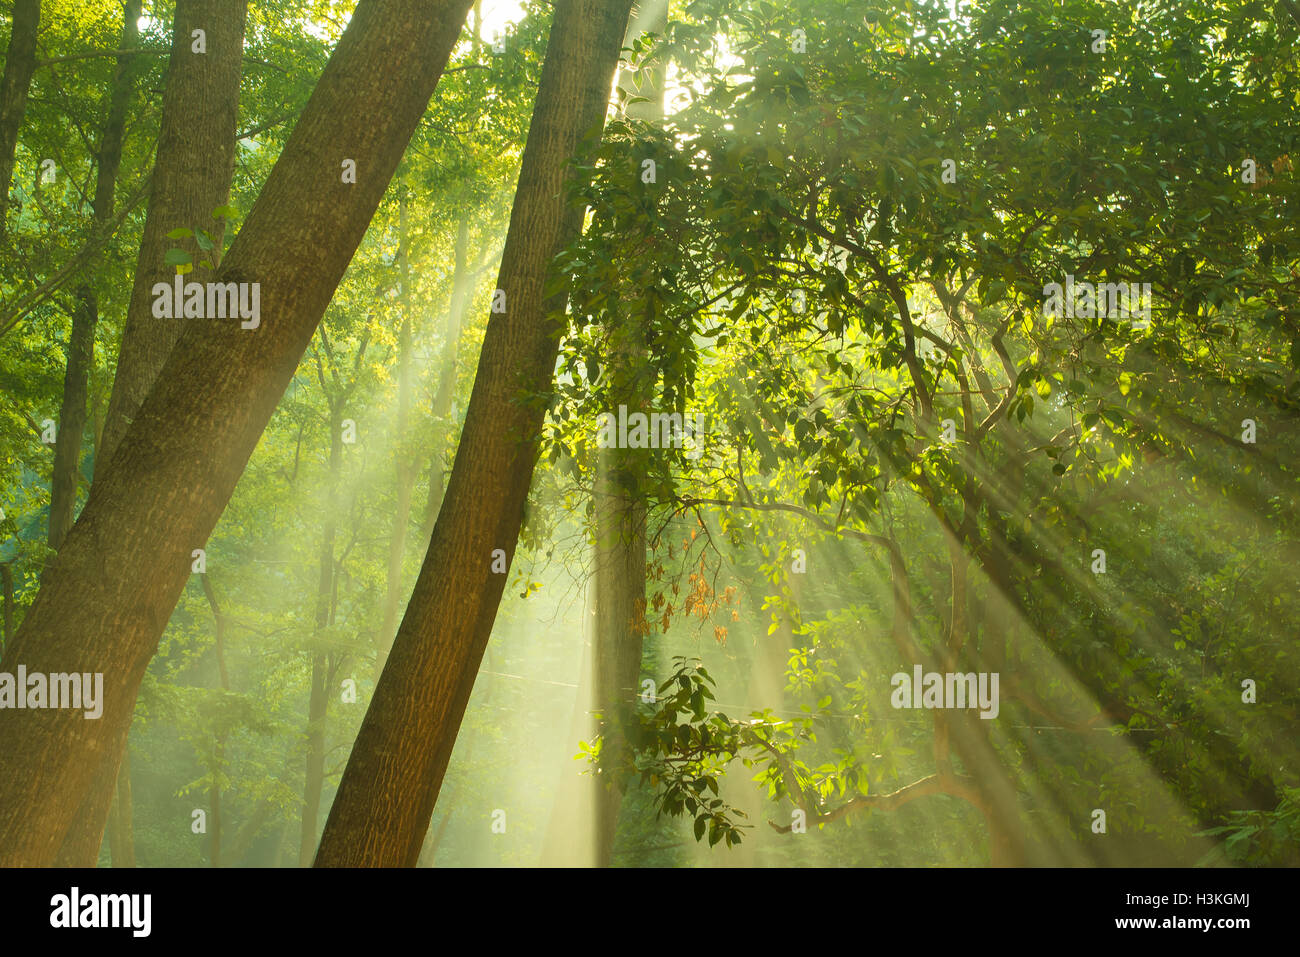 Rays of sunlight and Green Forest Stock Photo